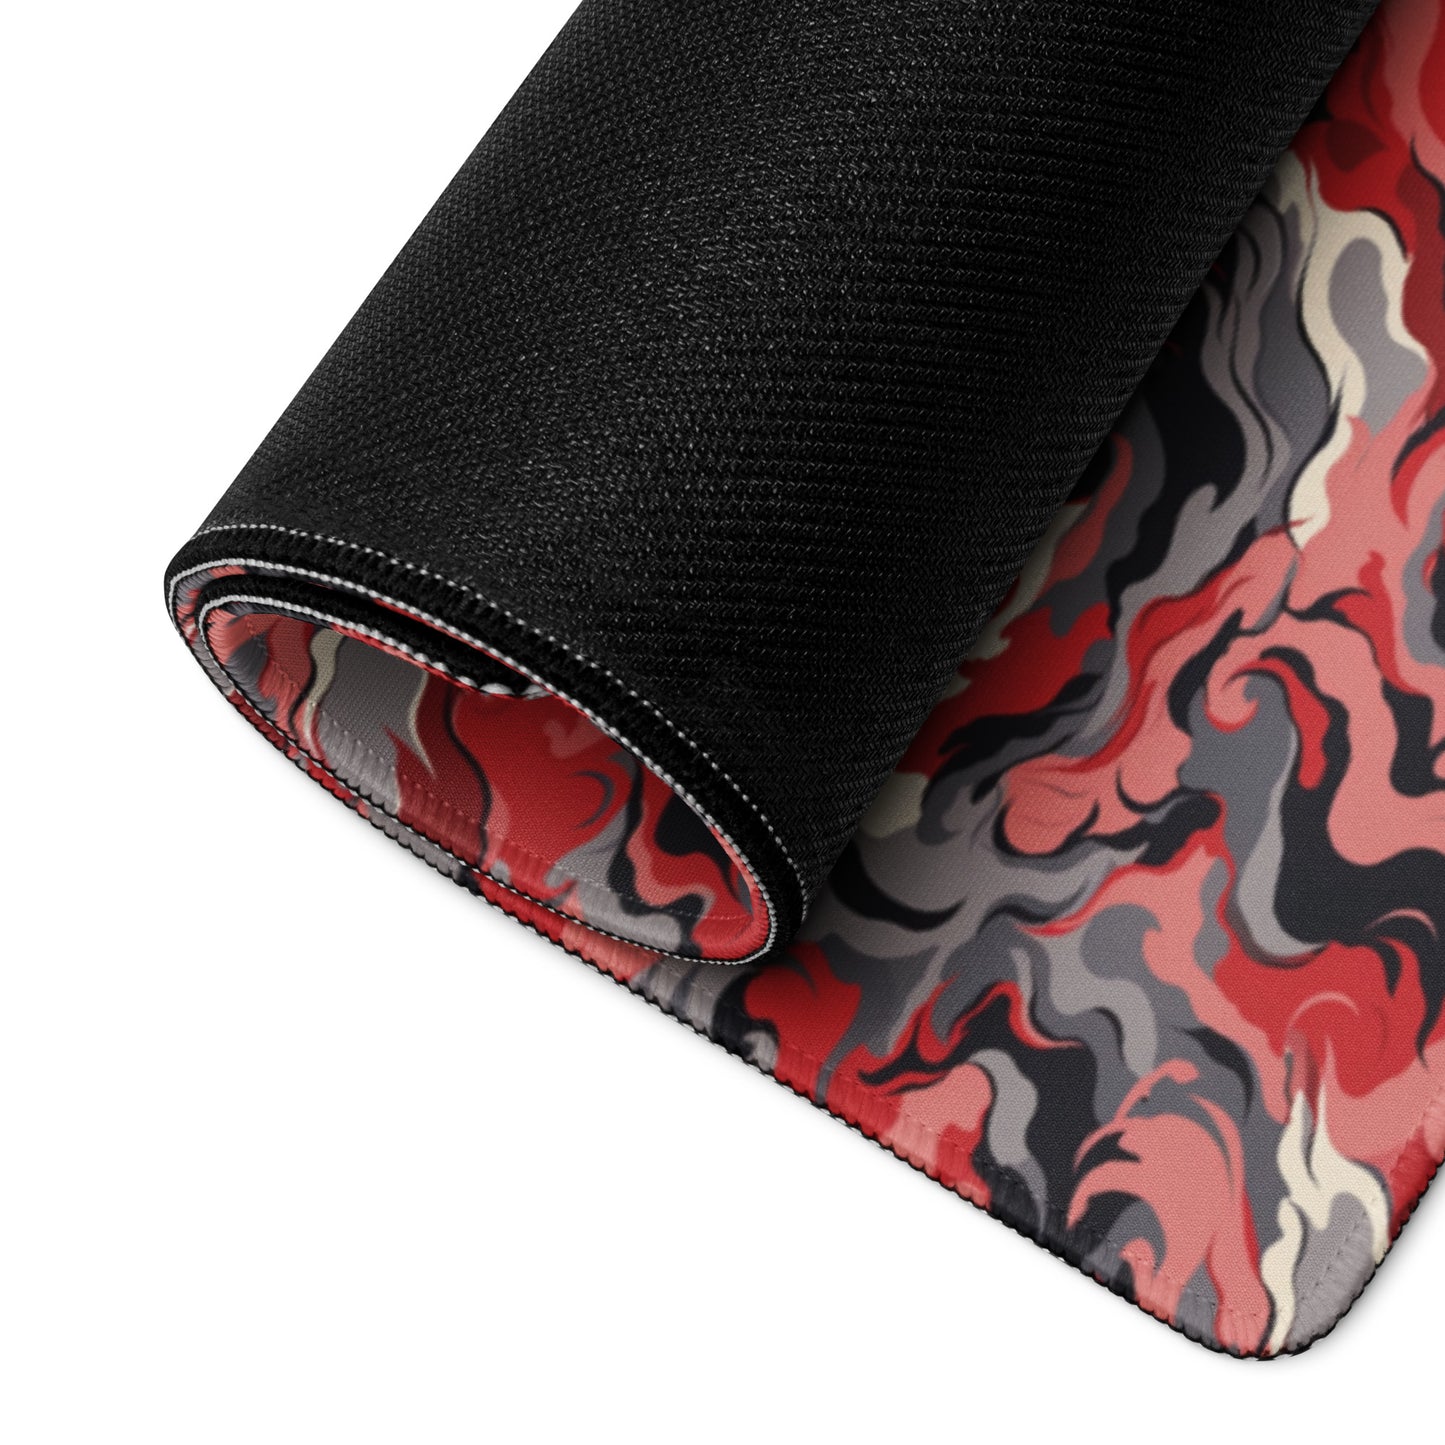 A 36" x 18" desk pad with a grey and red camo pattern rolled up.